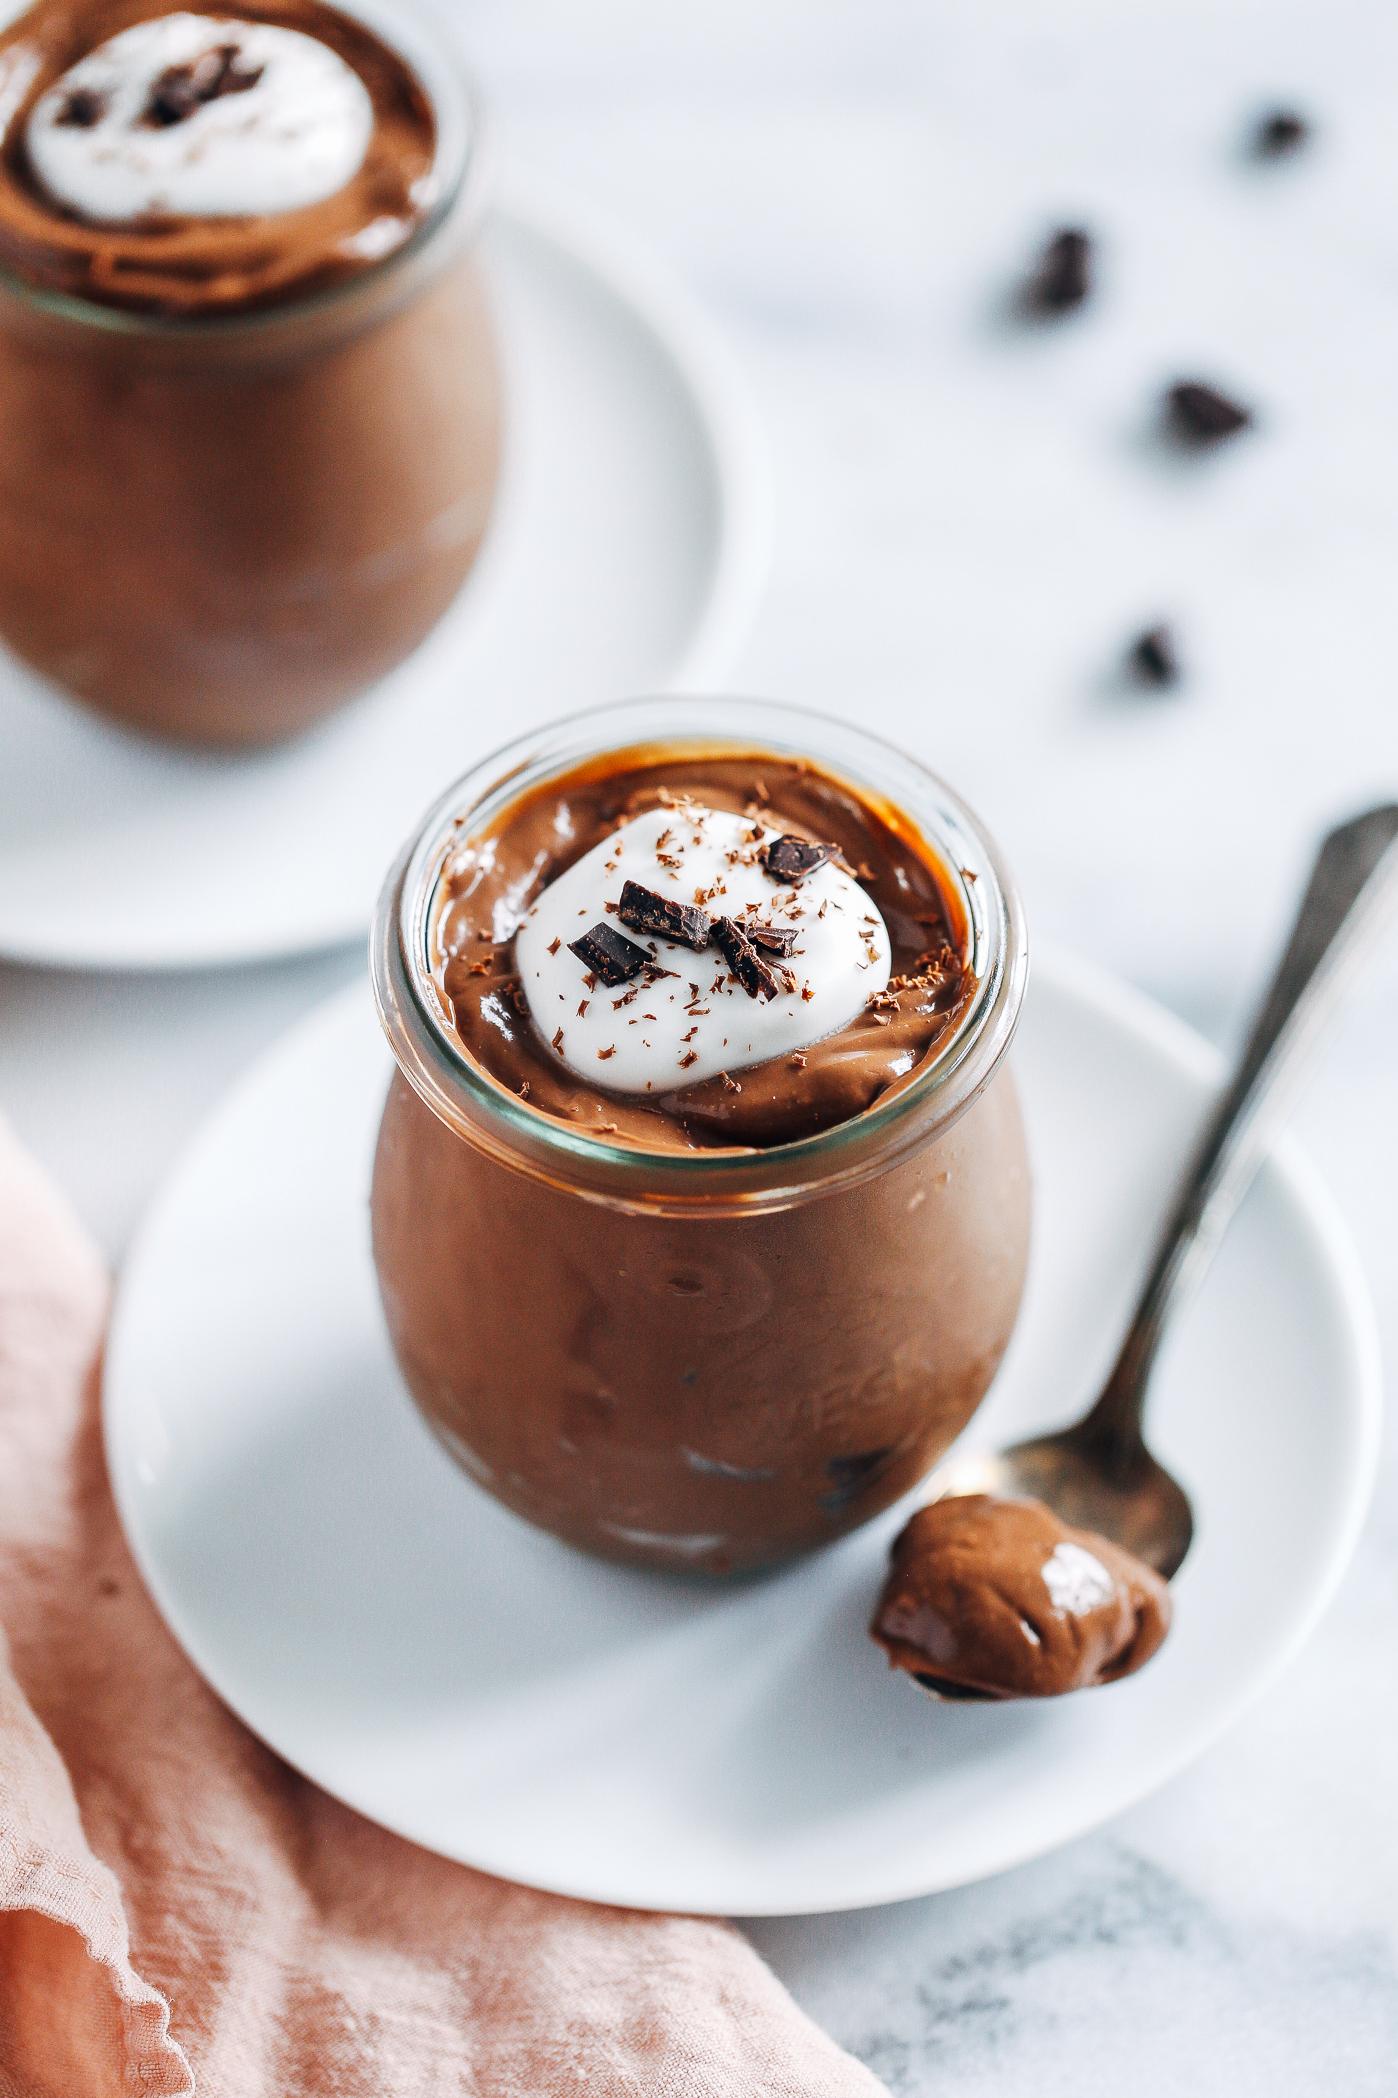  A delicious way to satisfy your chocolate cravings while getting a protein boost.